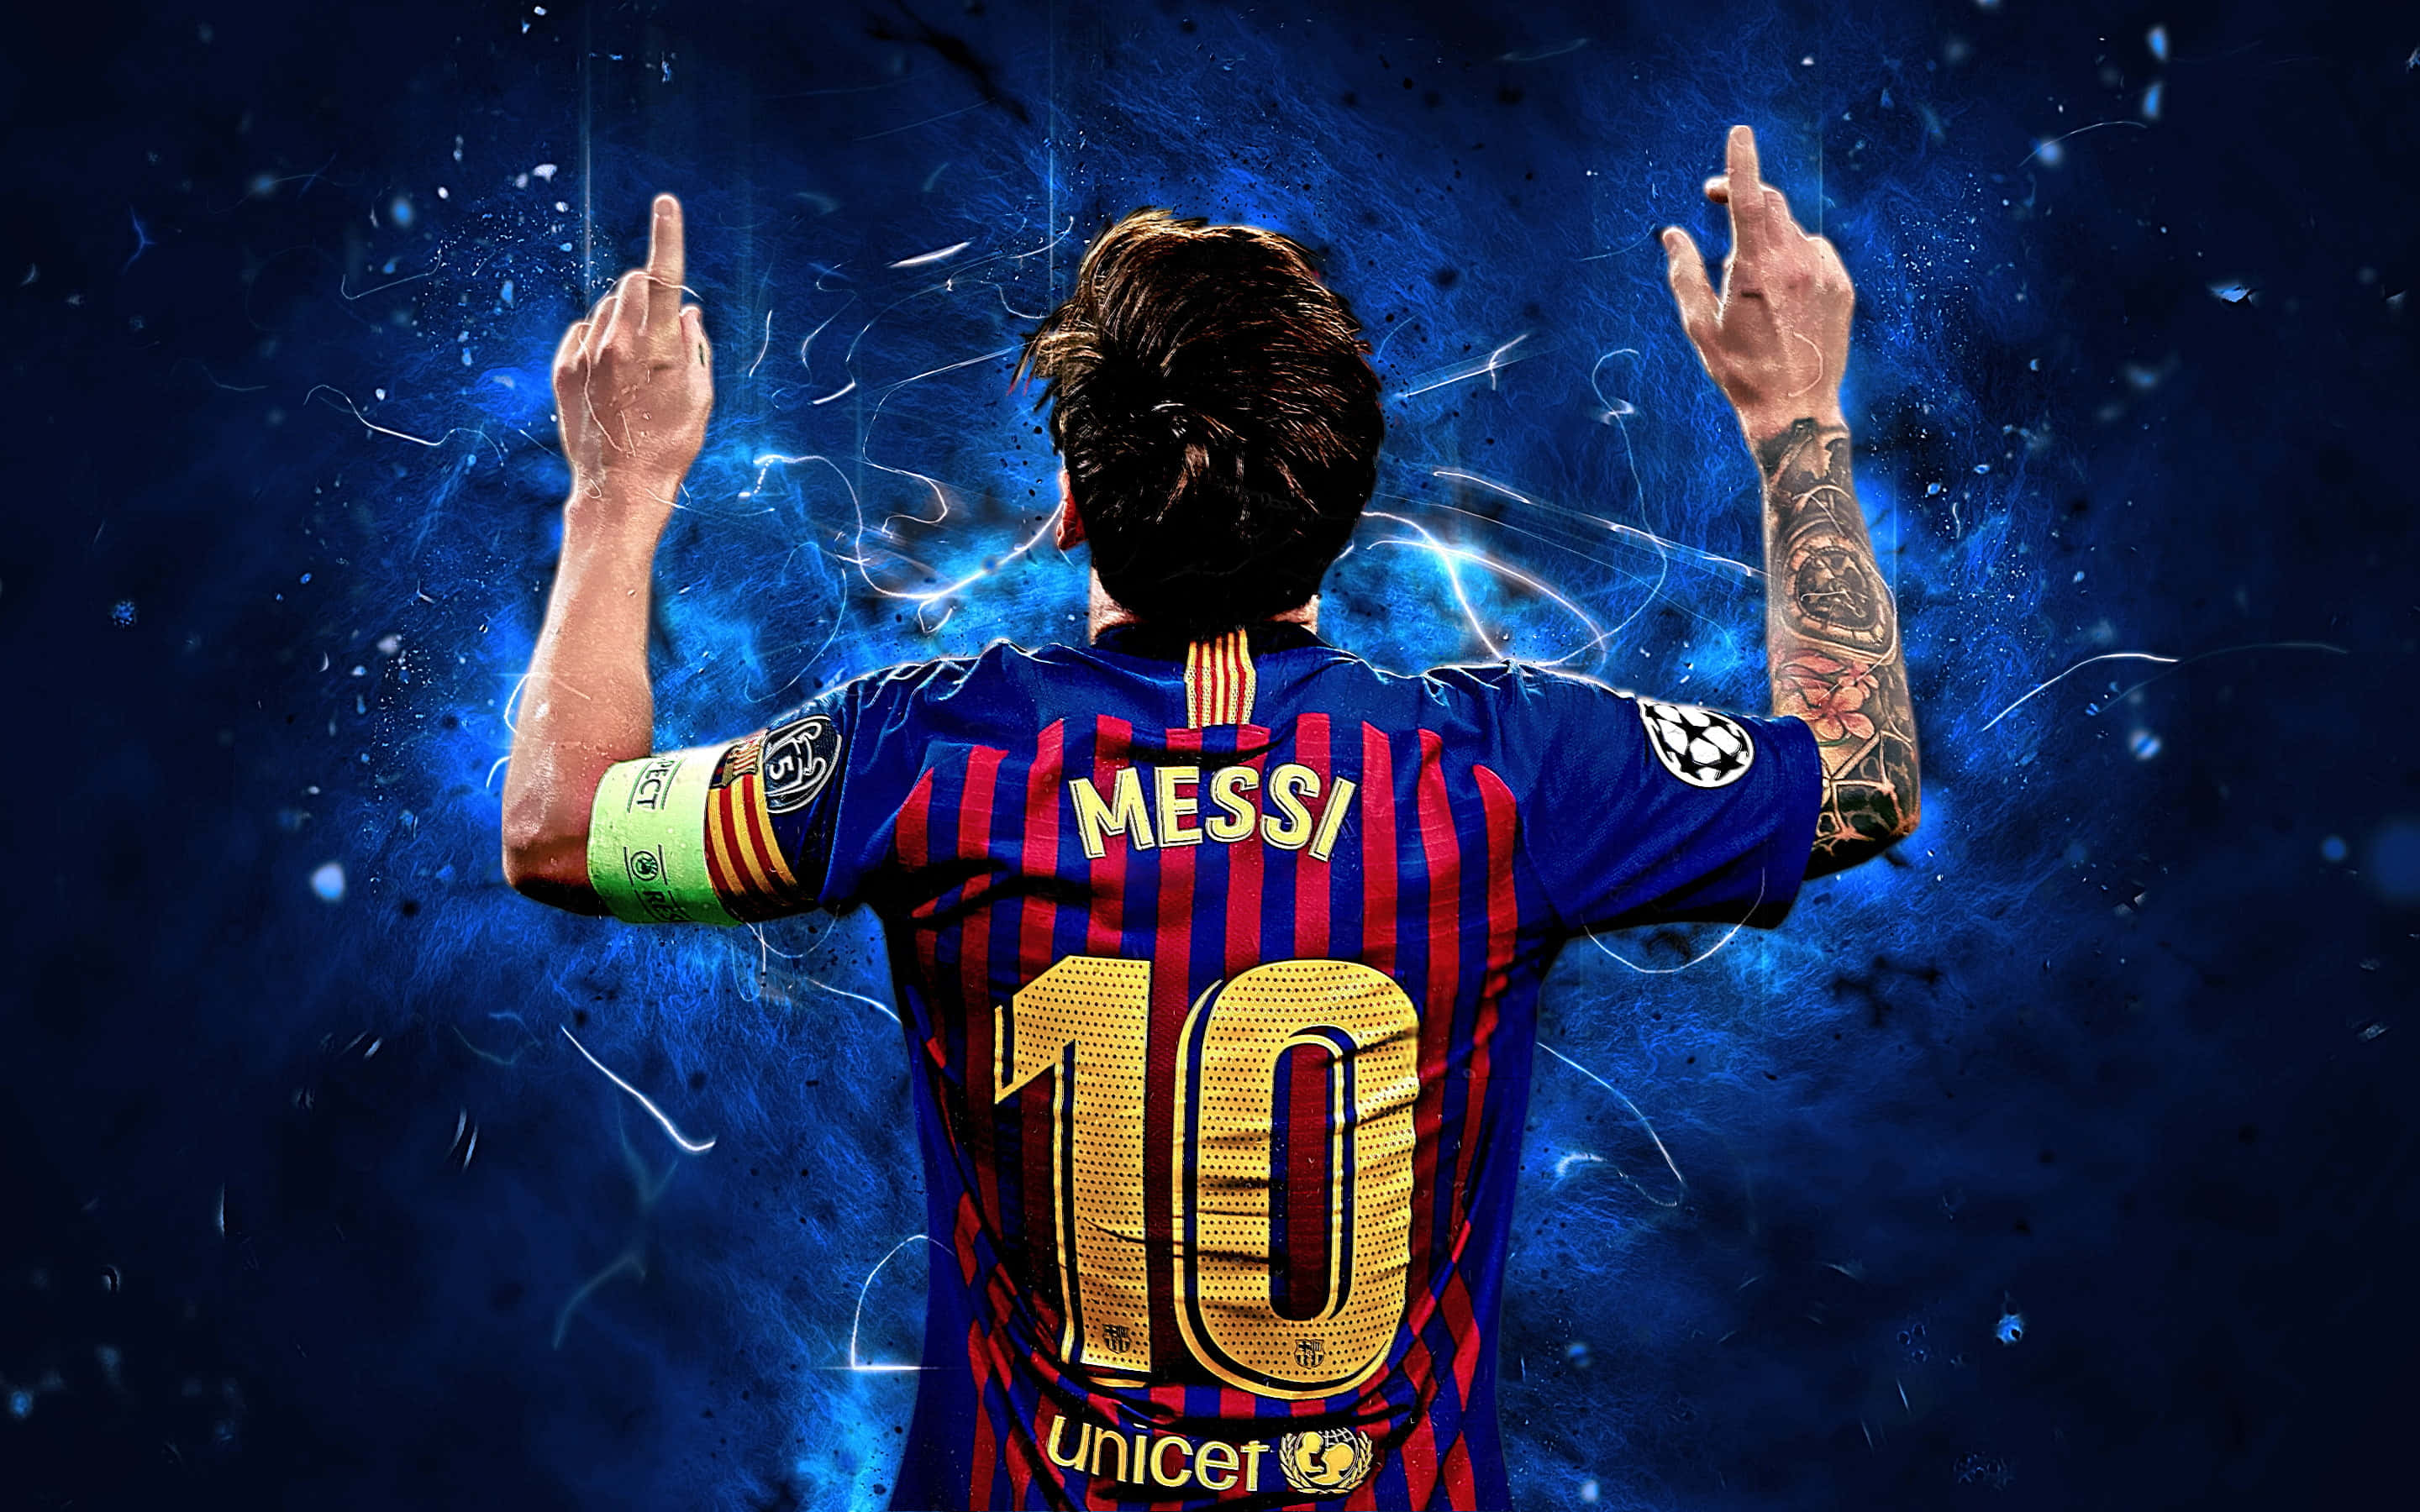 The Greatest Footballer on the Planet - Lionel Messi